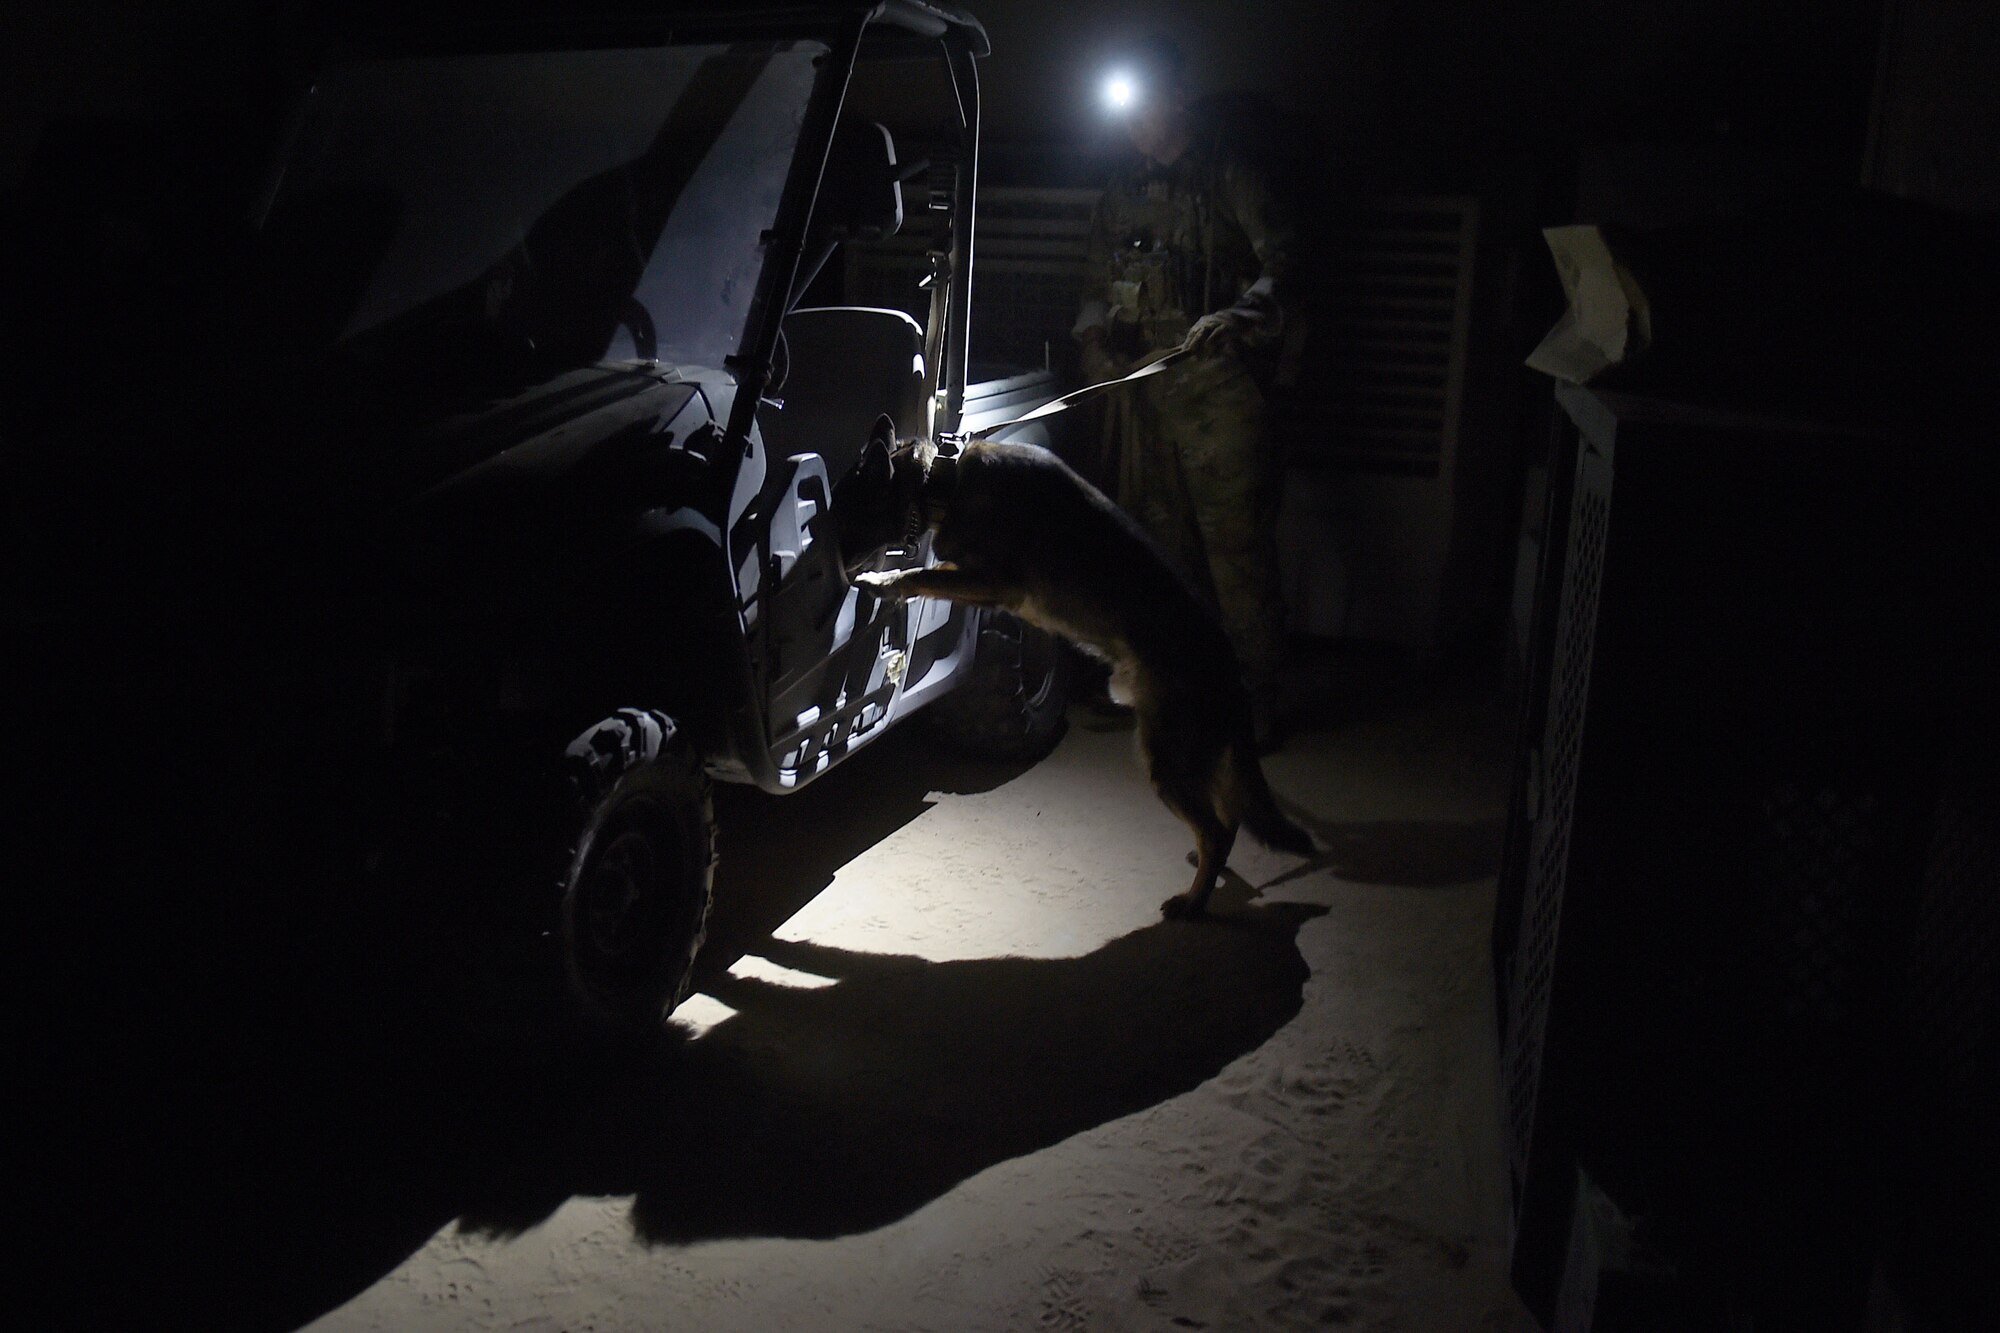 A military working dog sniffs smells in the dark